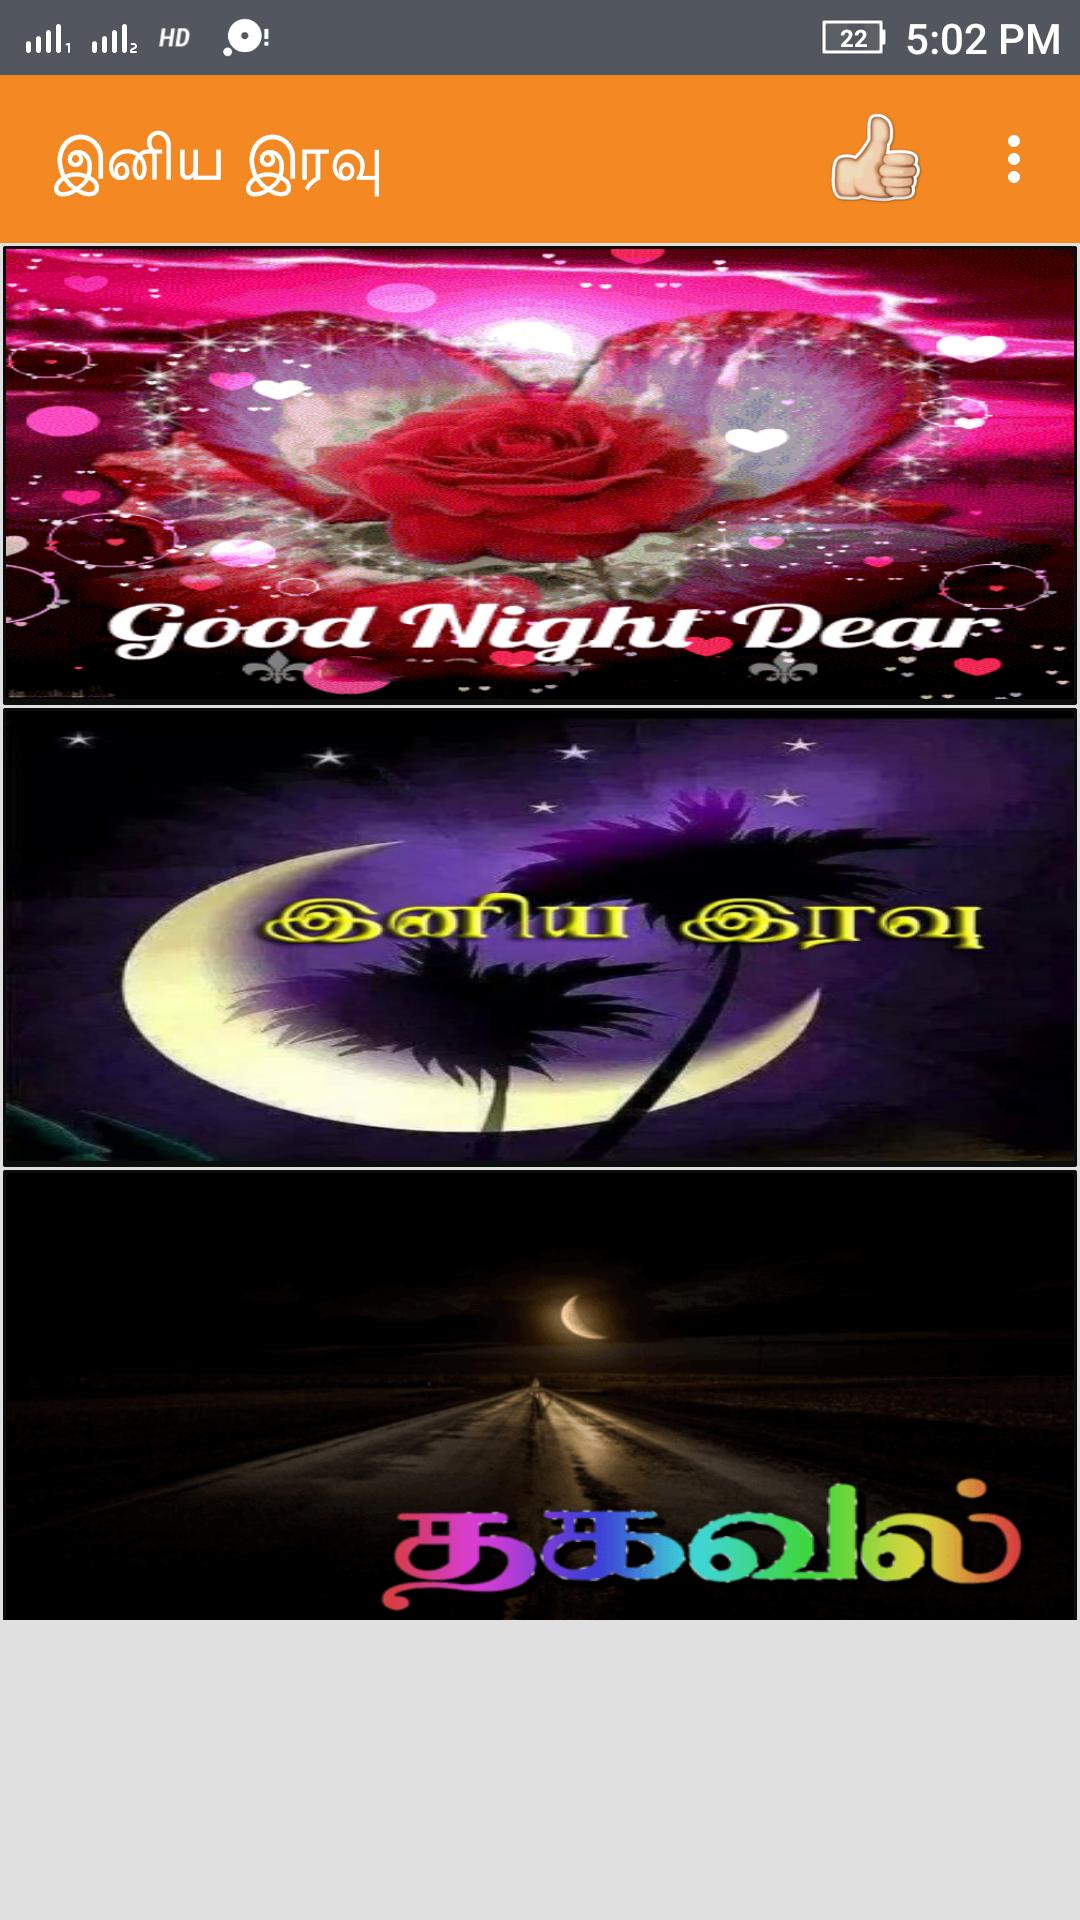 Tamil Good Night Sms Images For Android Apk Download